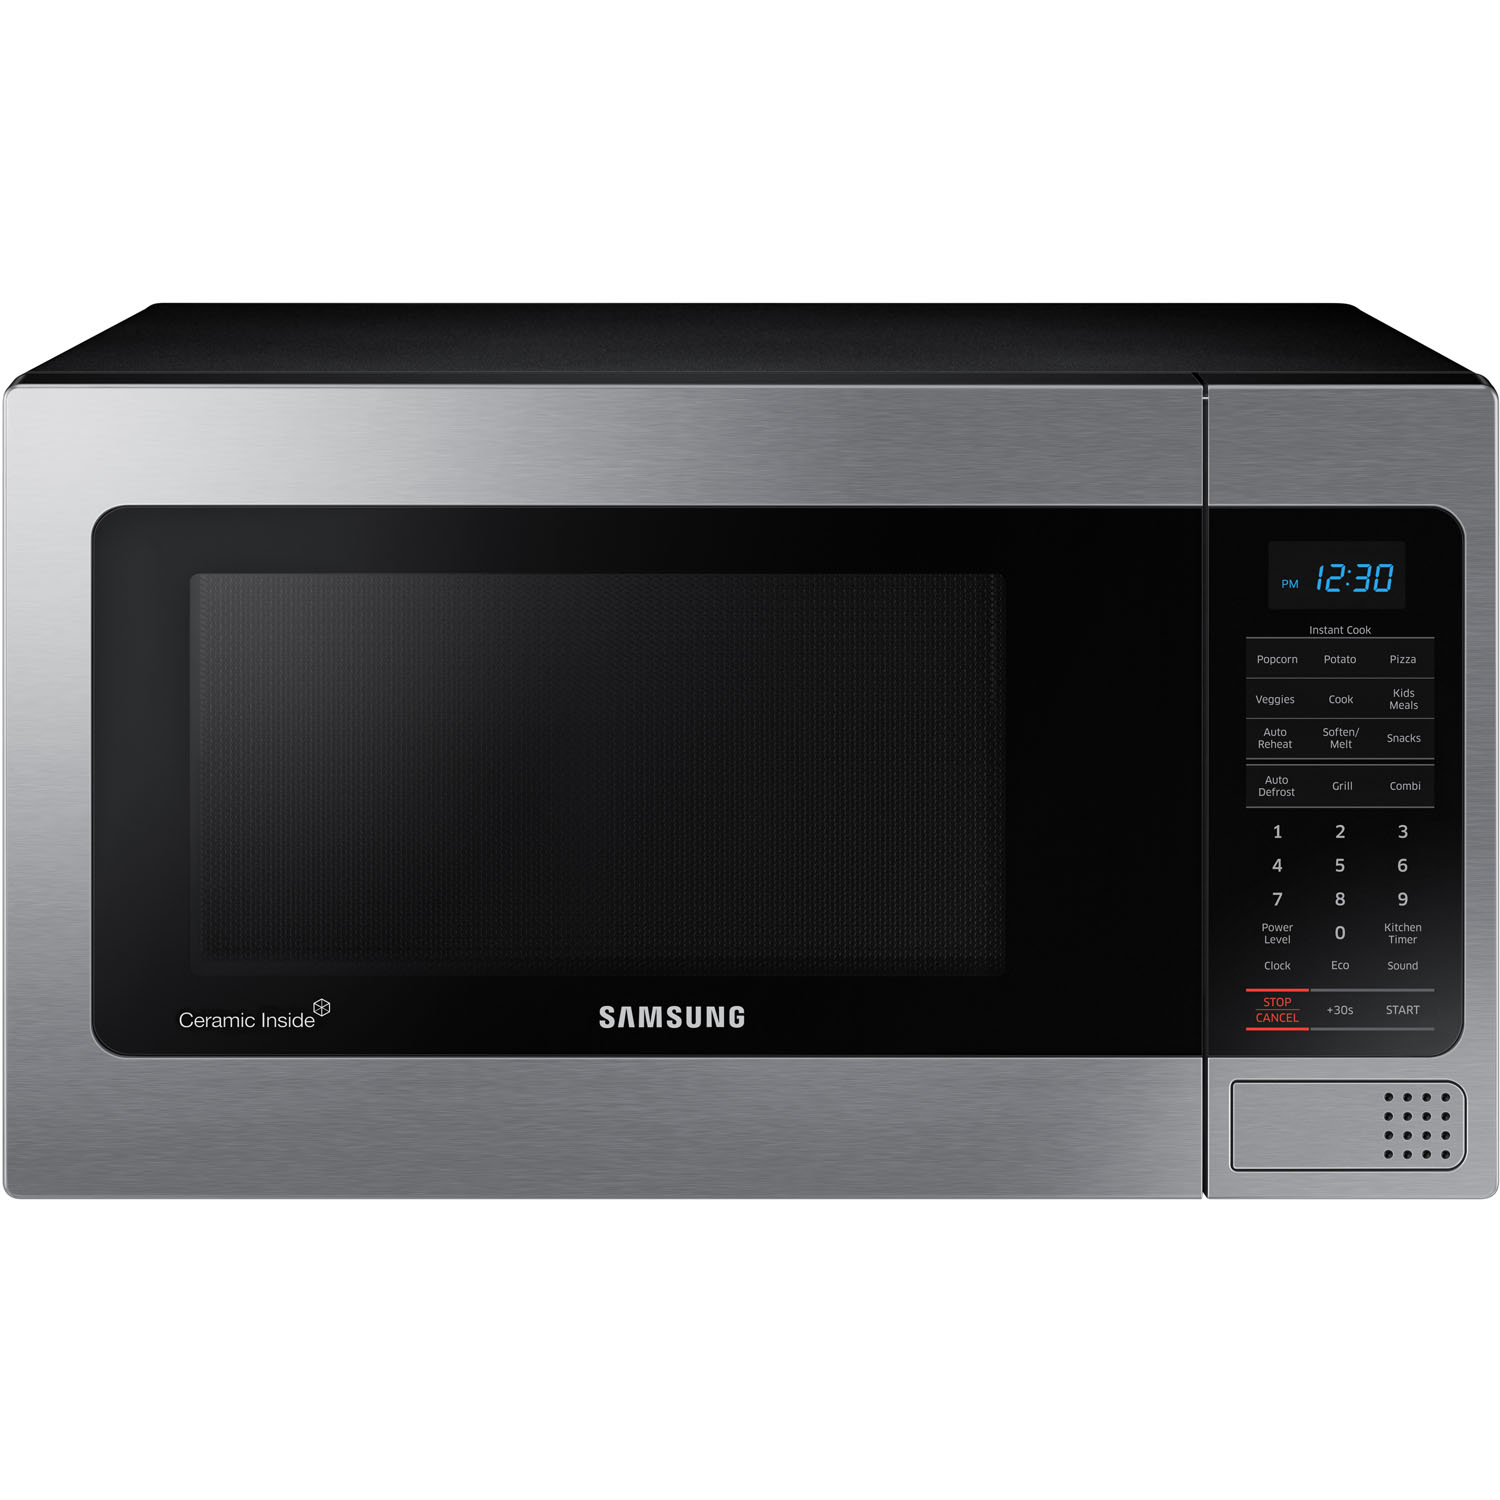 Samsung 1.1 cu. ft. Counter Top Microwave - Stainless Steel - image 1 of 6